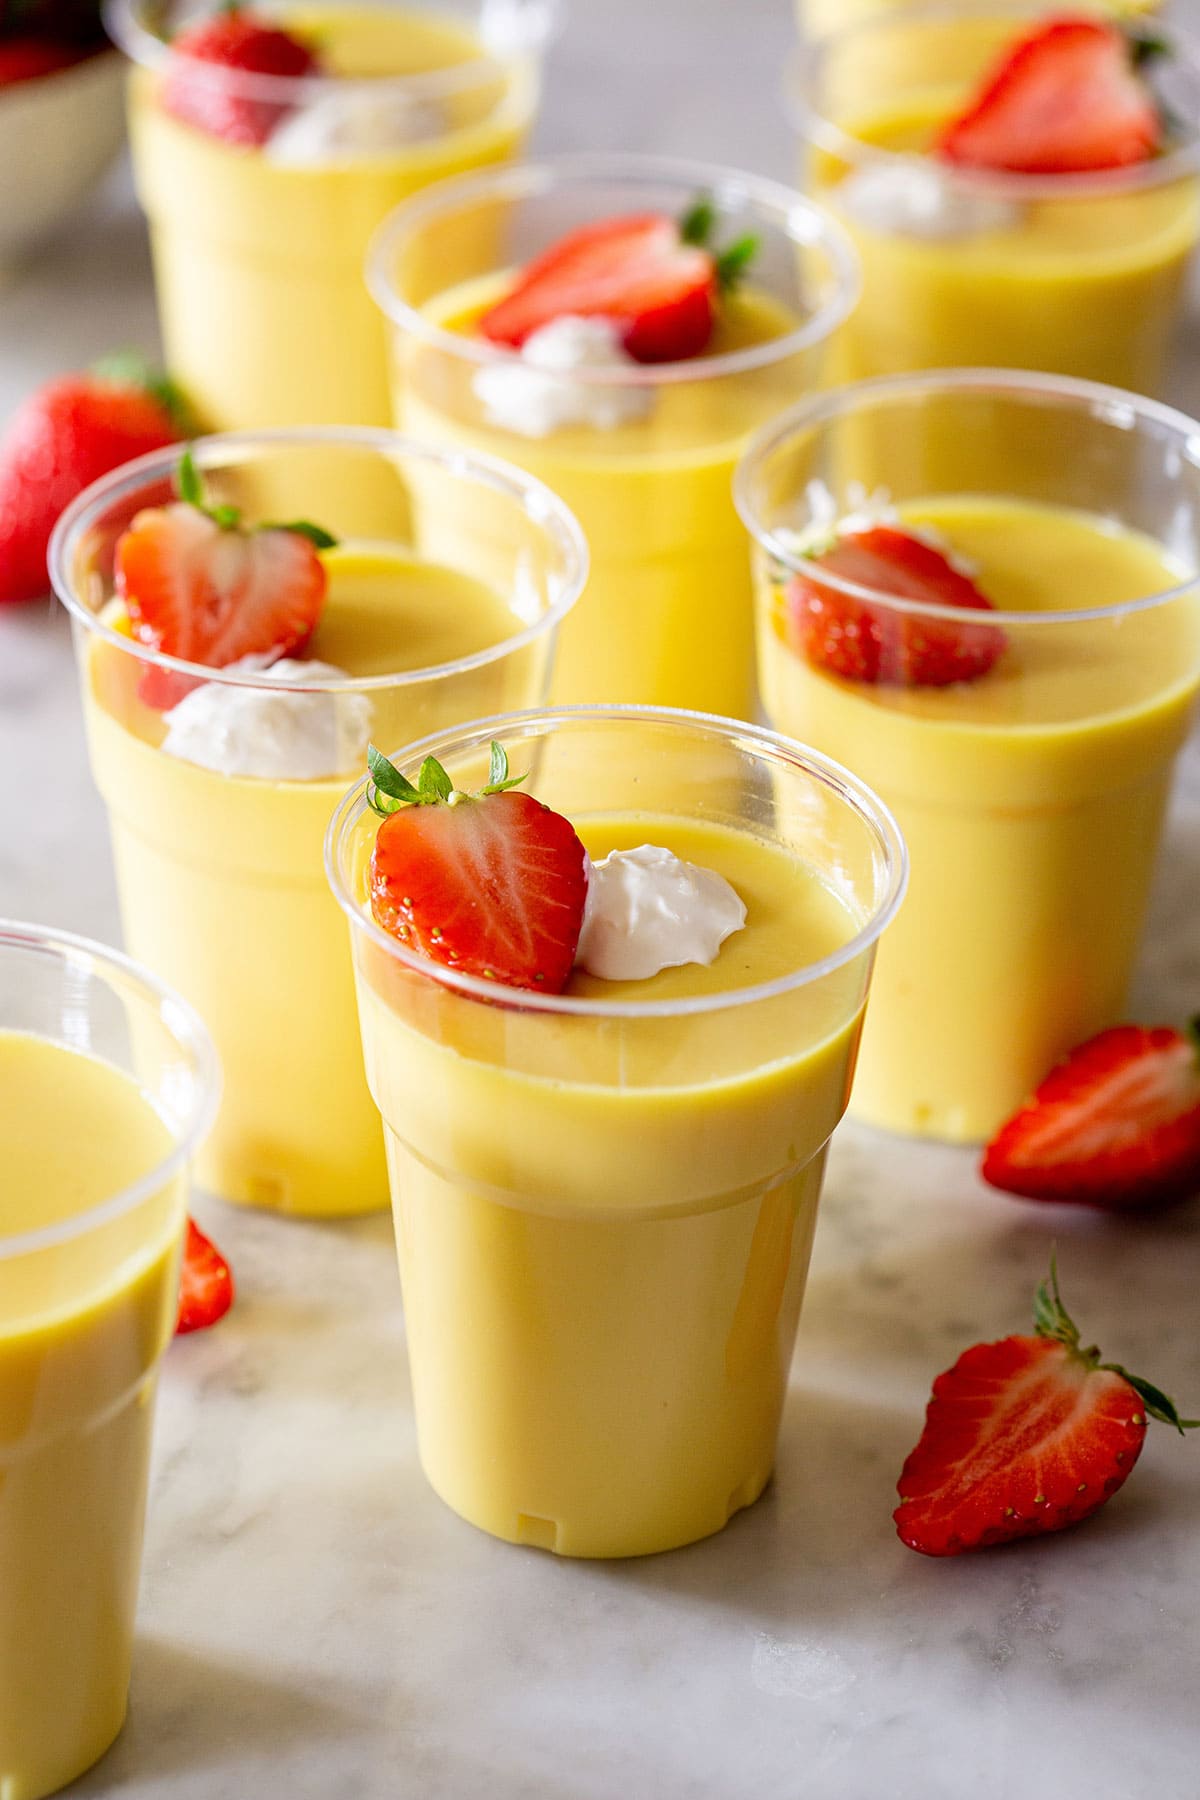 Gelatina de rompope in cups garnished with fresh strawberries and whipped cream.